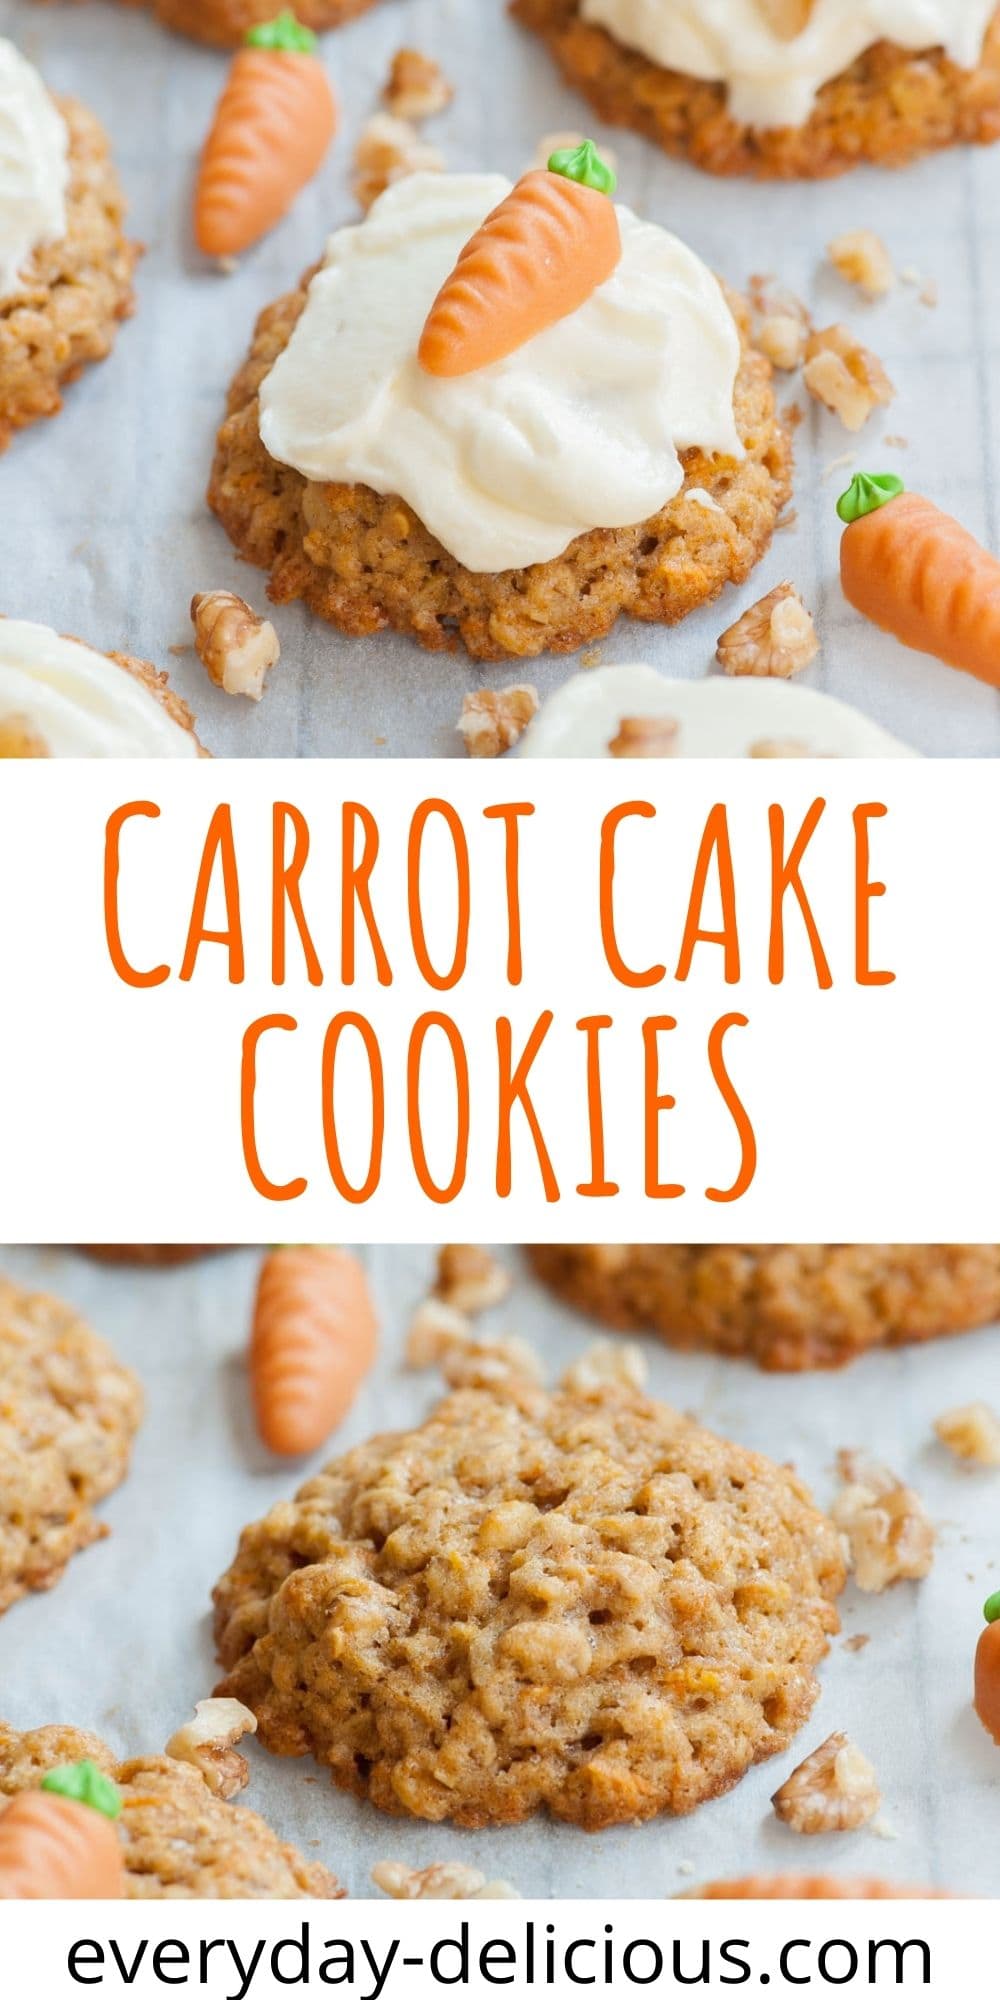 Carrot cake cookies with cream cheese frosting - Everyday Delicious